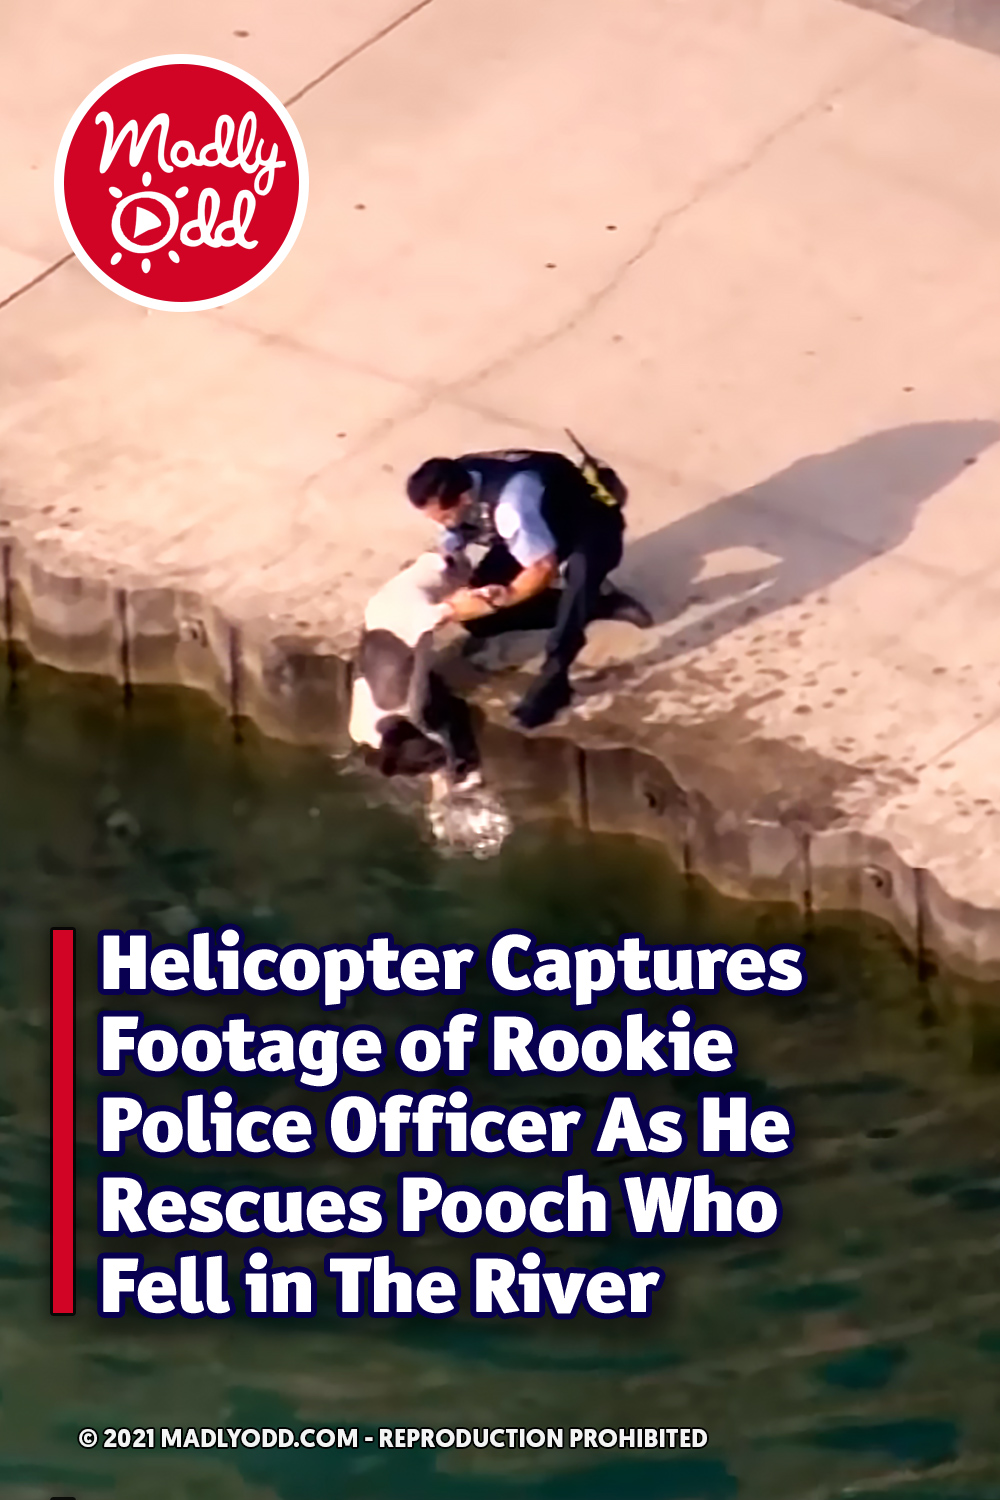 Helicopter Captures Footage of Rookie Police Officer As He Rescues Pooch Who Fell in The River